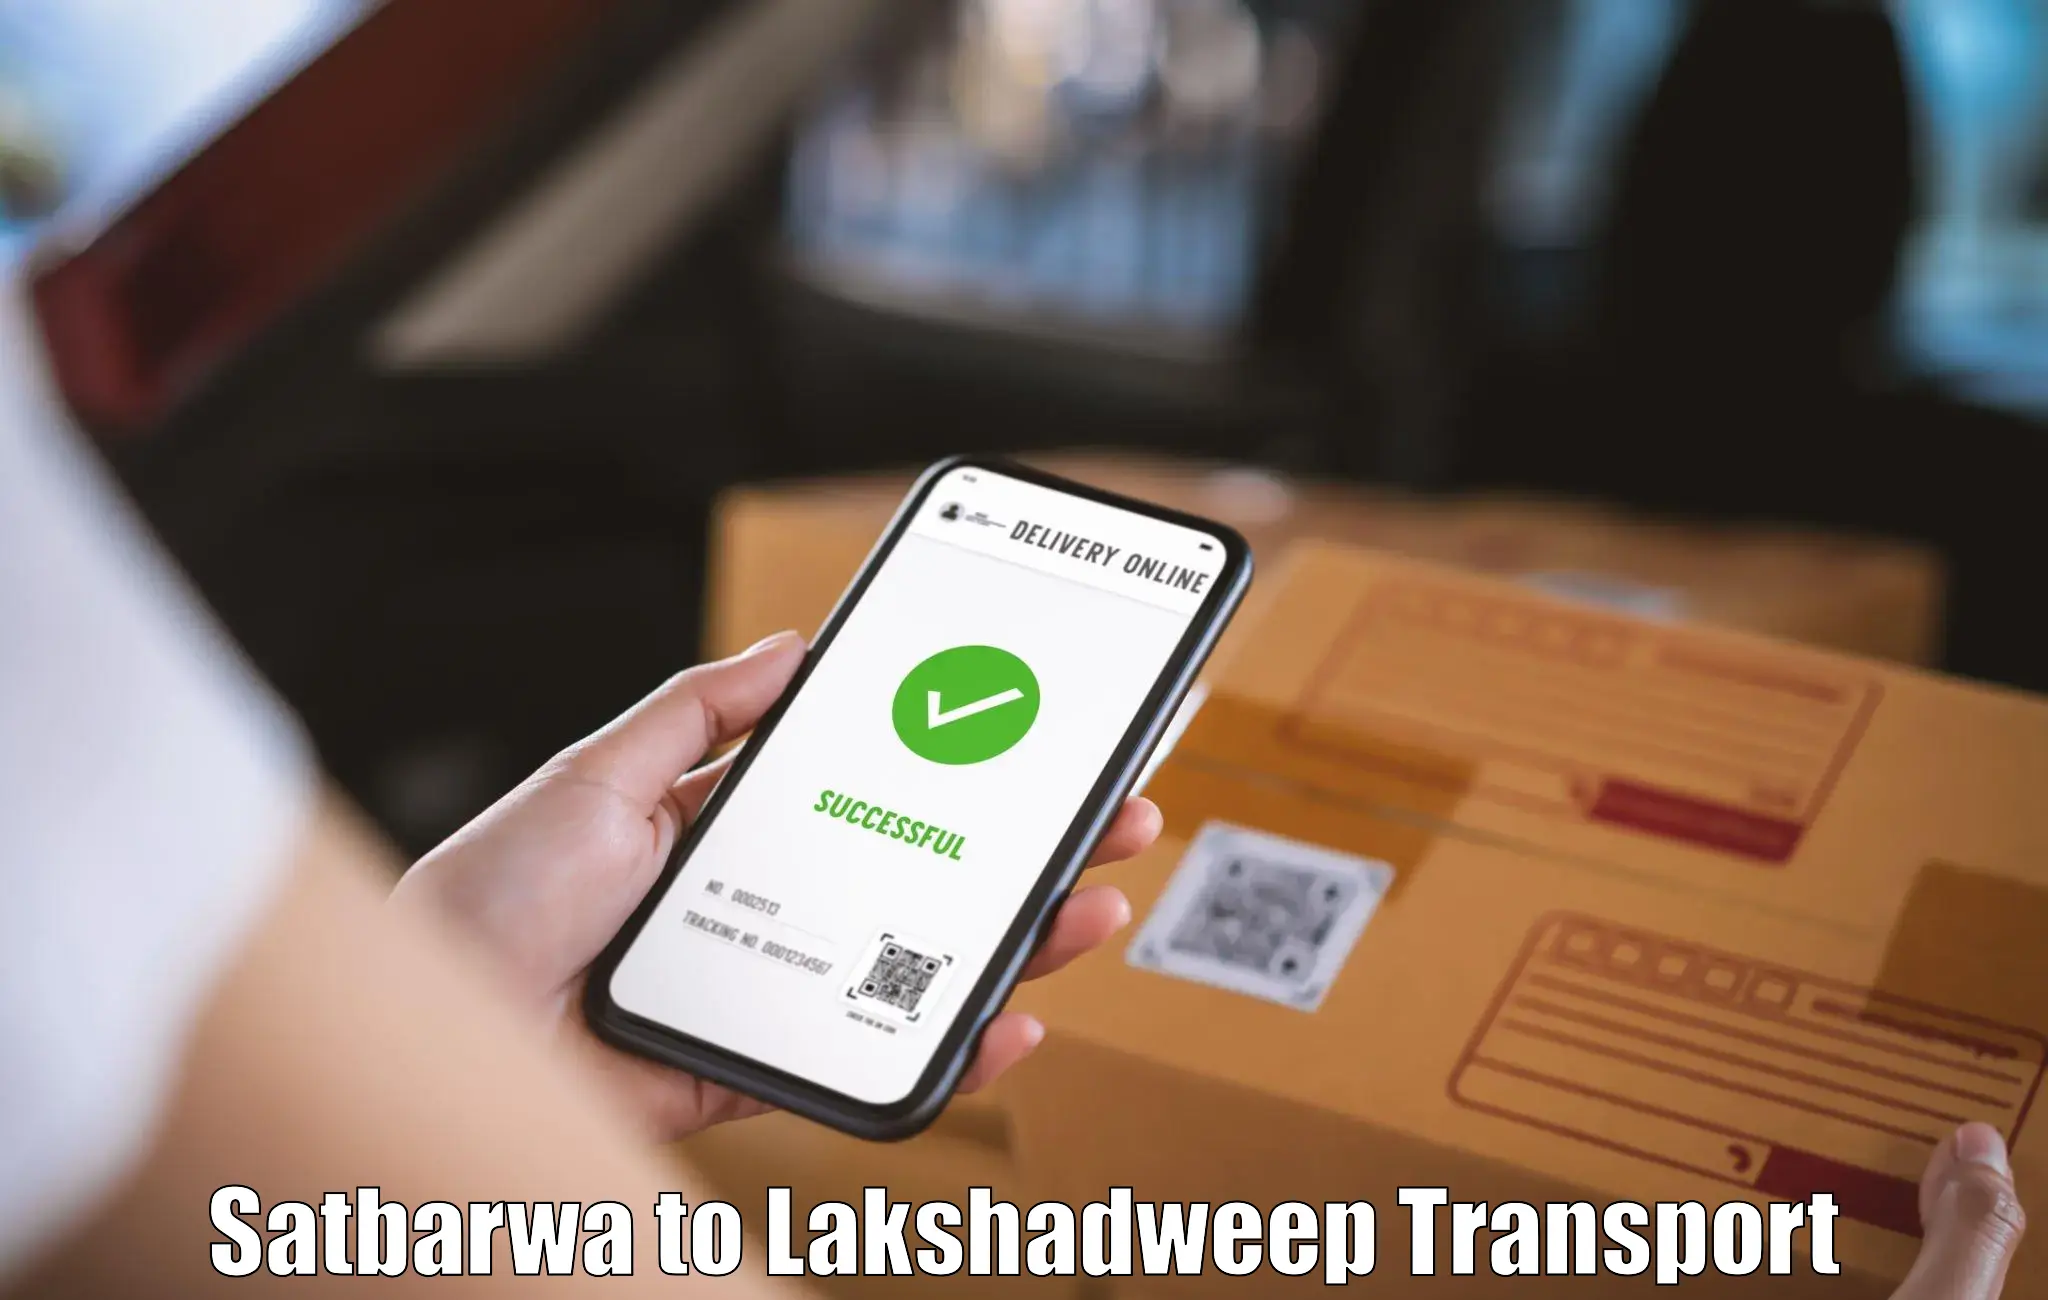 Package delivery services Satbarwa to Lakshadweep